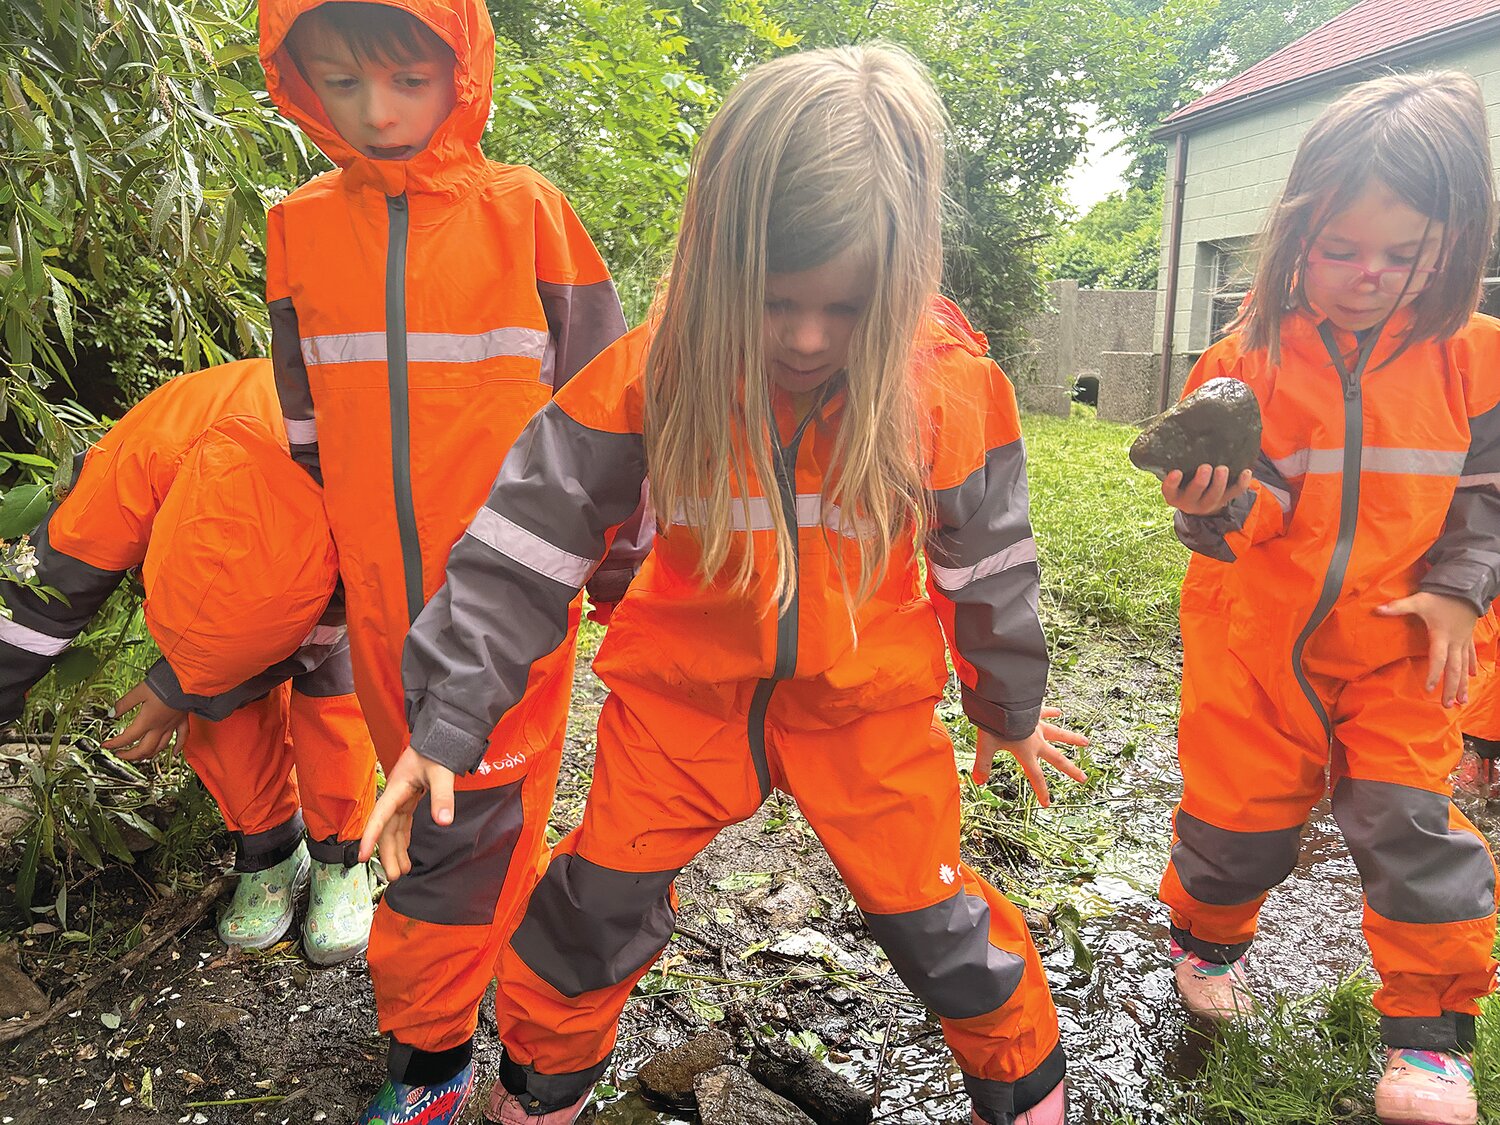 Gordon School puts a lot of emphasis on outdoor learning. Here, students in the lower grades, who all have rain suits and boots, explore the stream that runs through the campus on a rainy day.